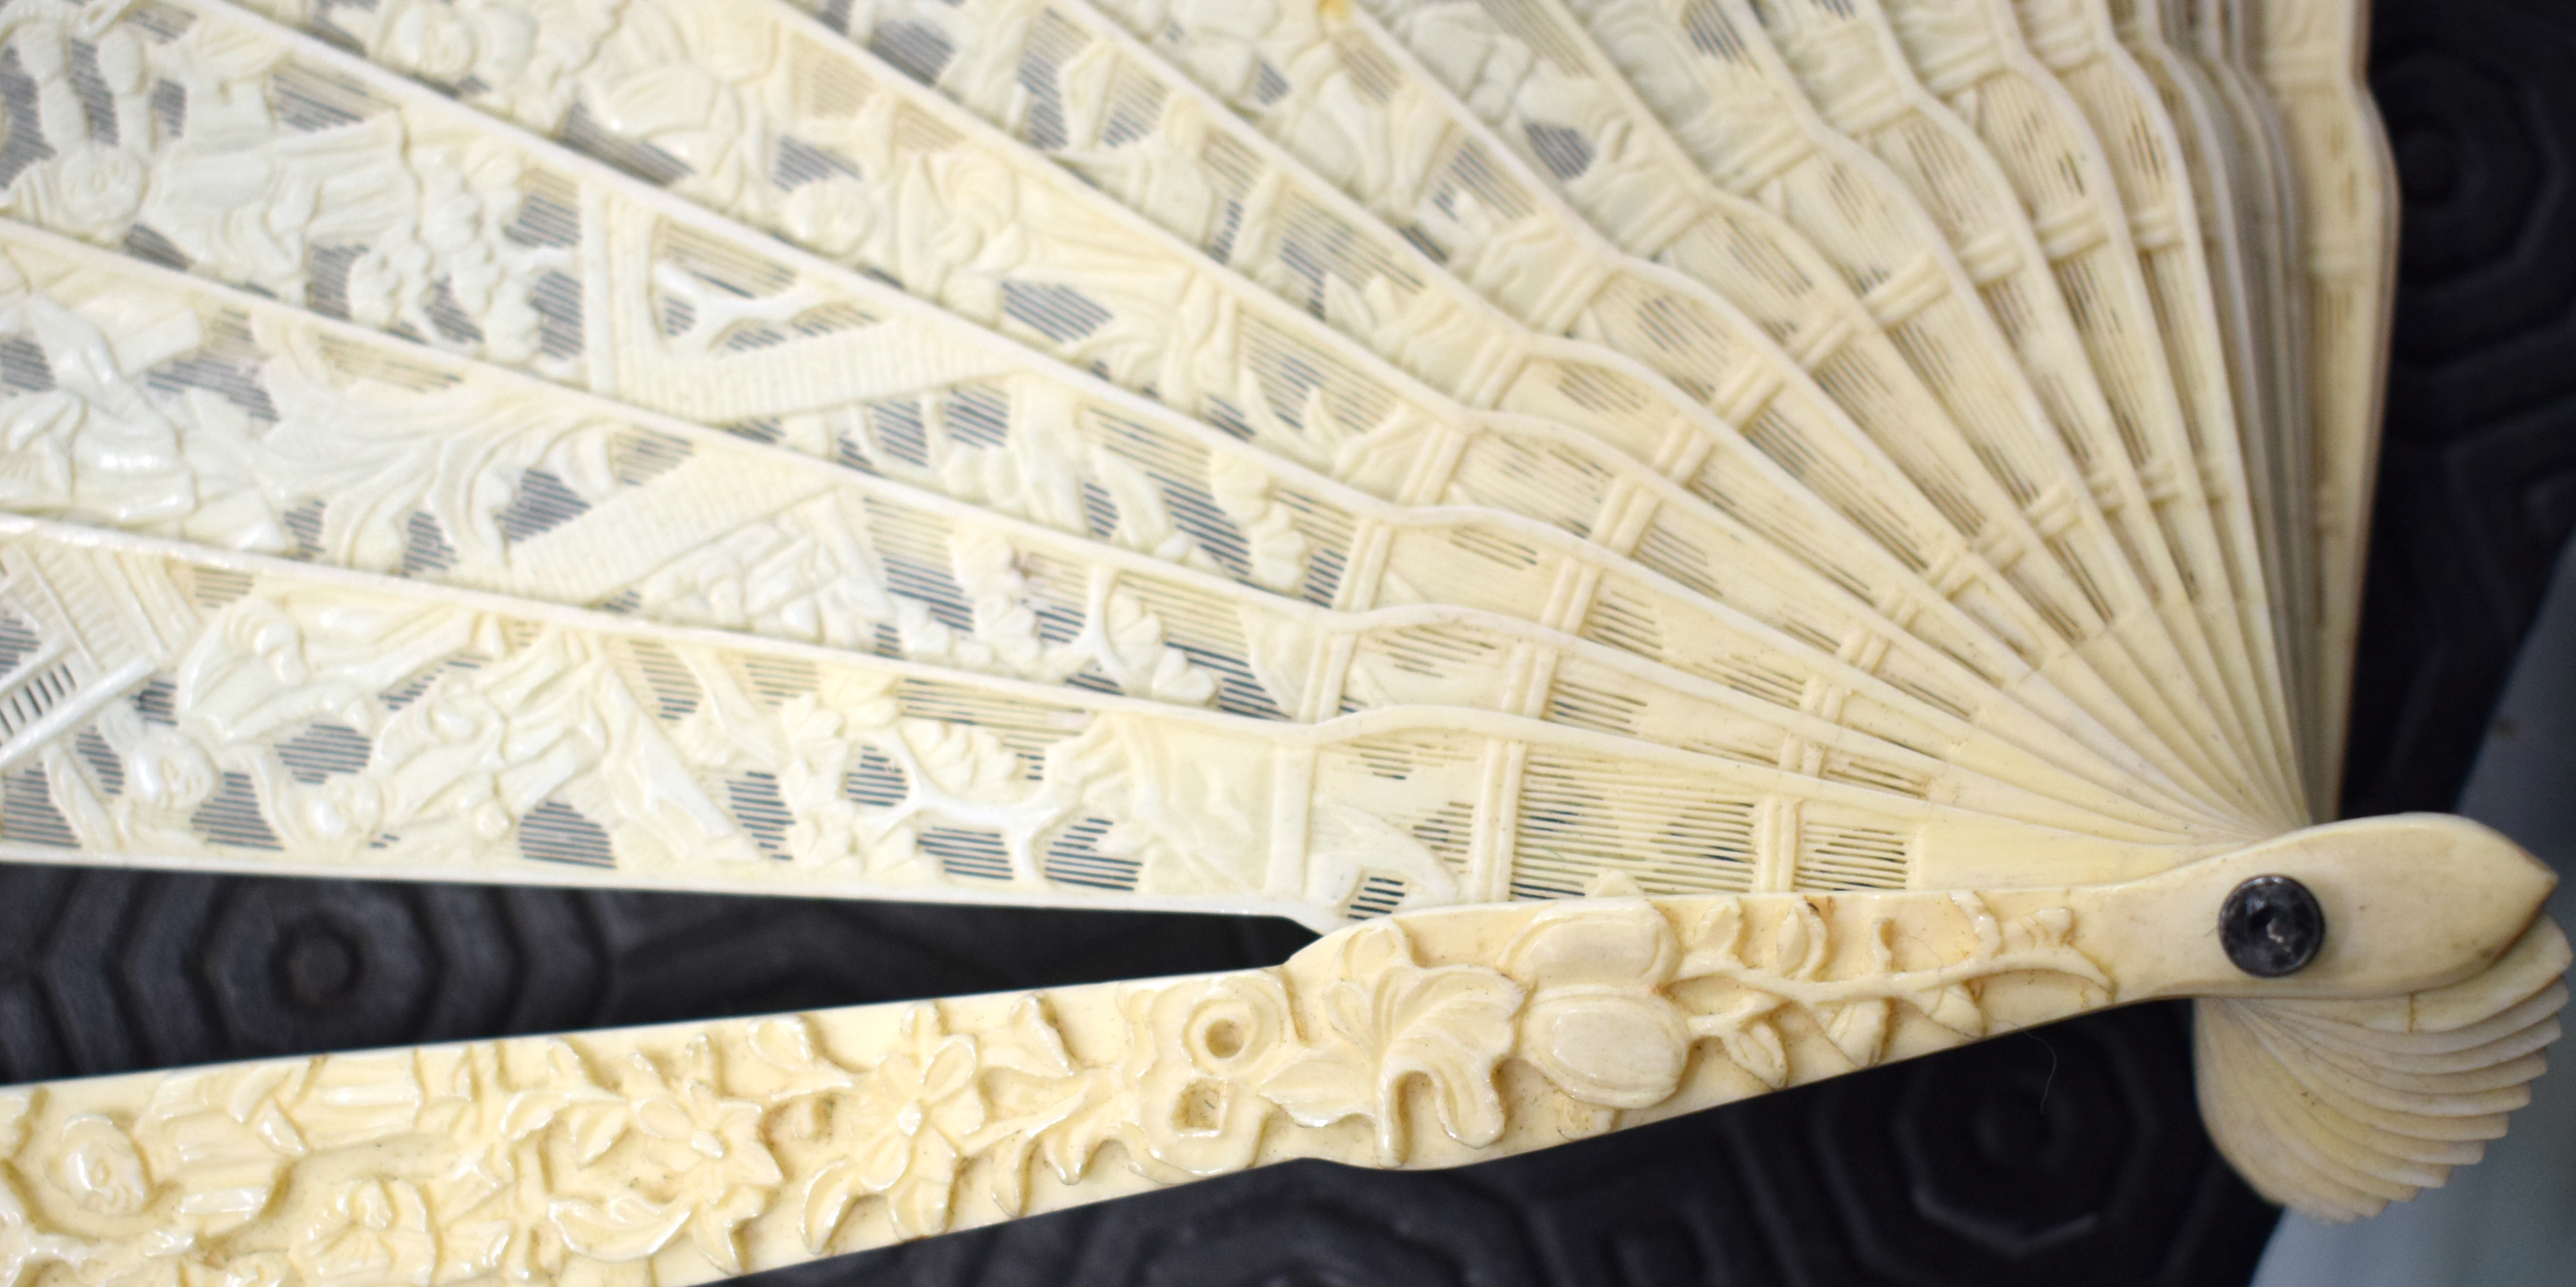 A FINE 19TH CENTURY CHINESE CARVED IVORY BRISE FAN C1840 decorated with figures. 30 cm wide extended - Image 7 of 17